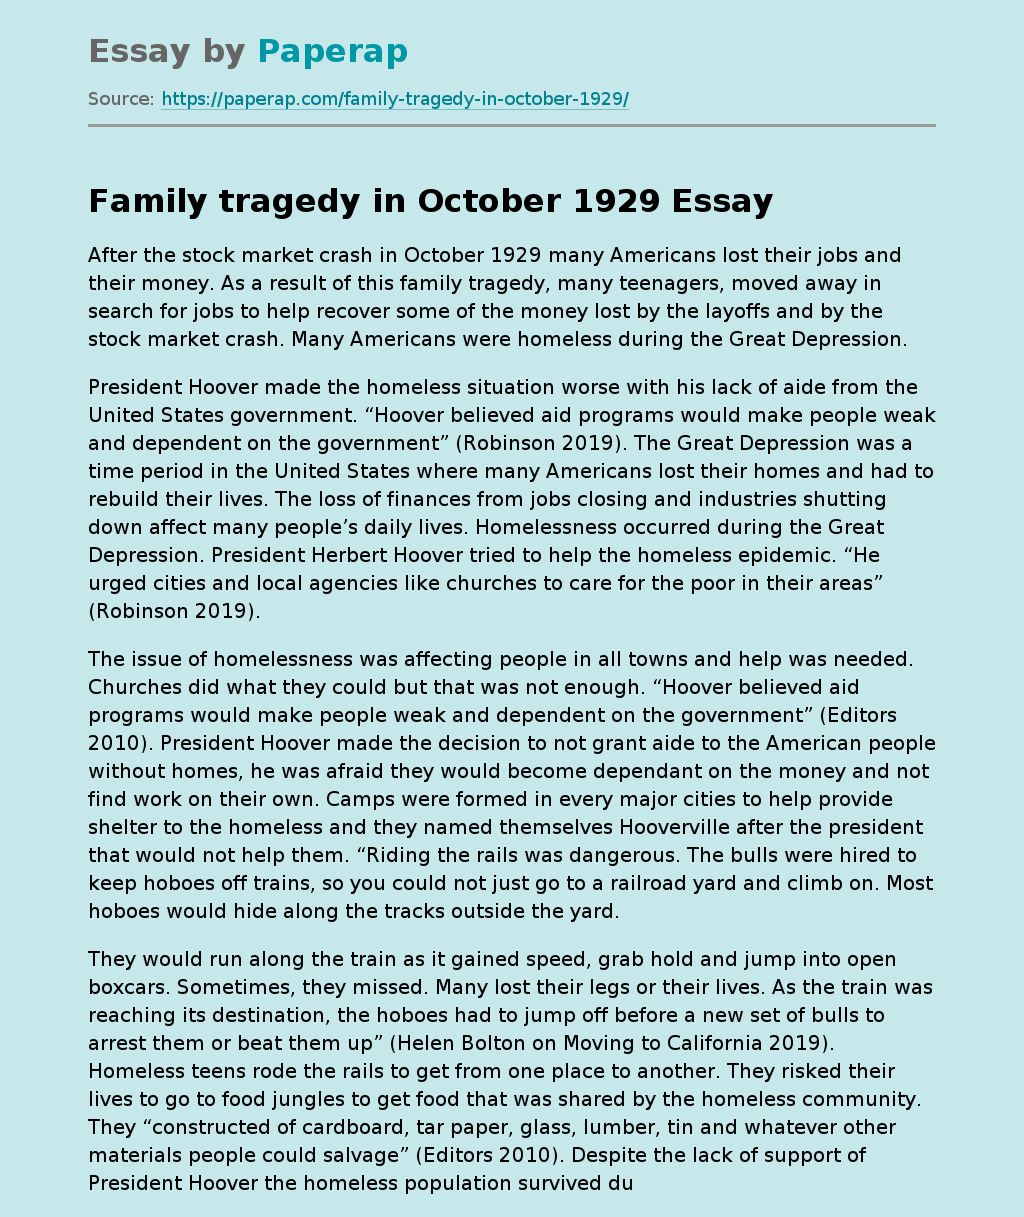 Family tragedy in October 1929